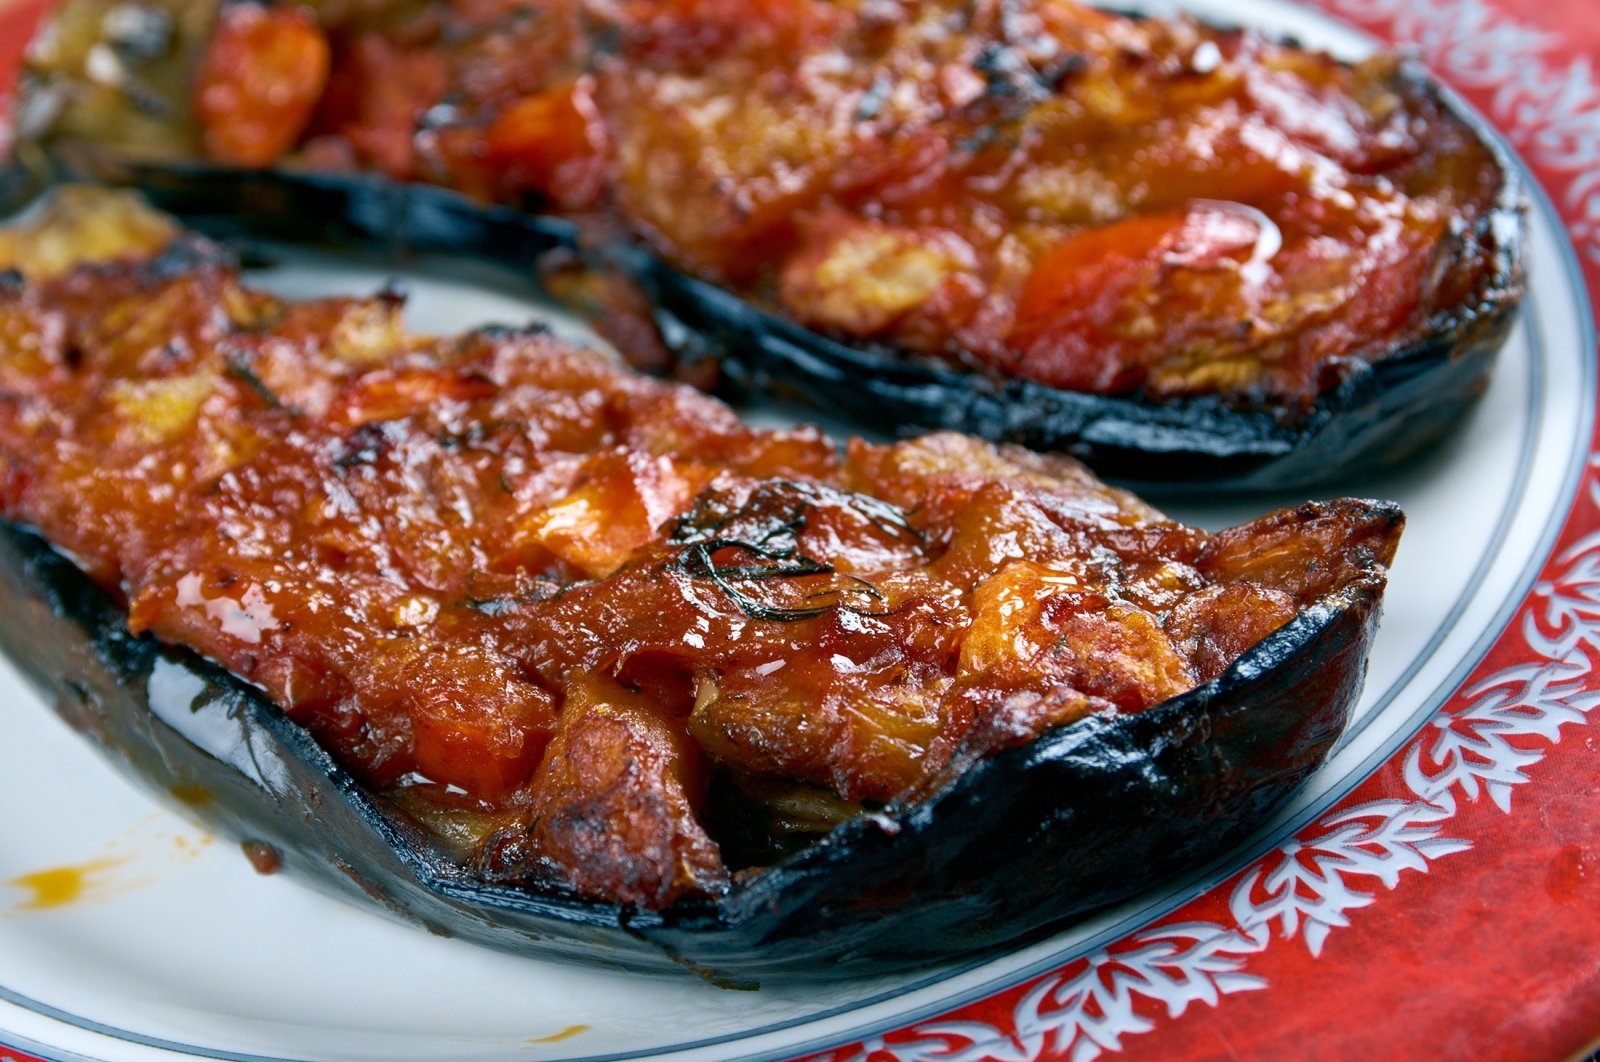 Most anyone visiting Turkey will admit that one of the greatest highlights of dining is the vast array of delicious eggplant dishes on offer. (Shutterstock Photo)